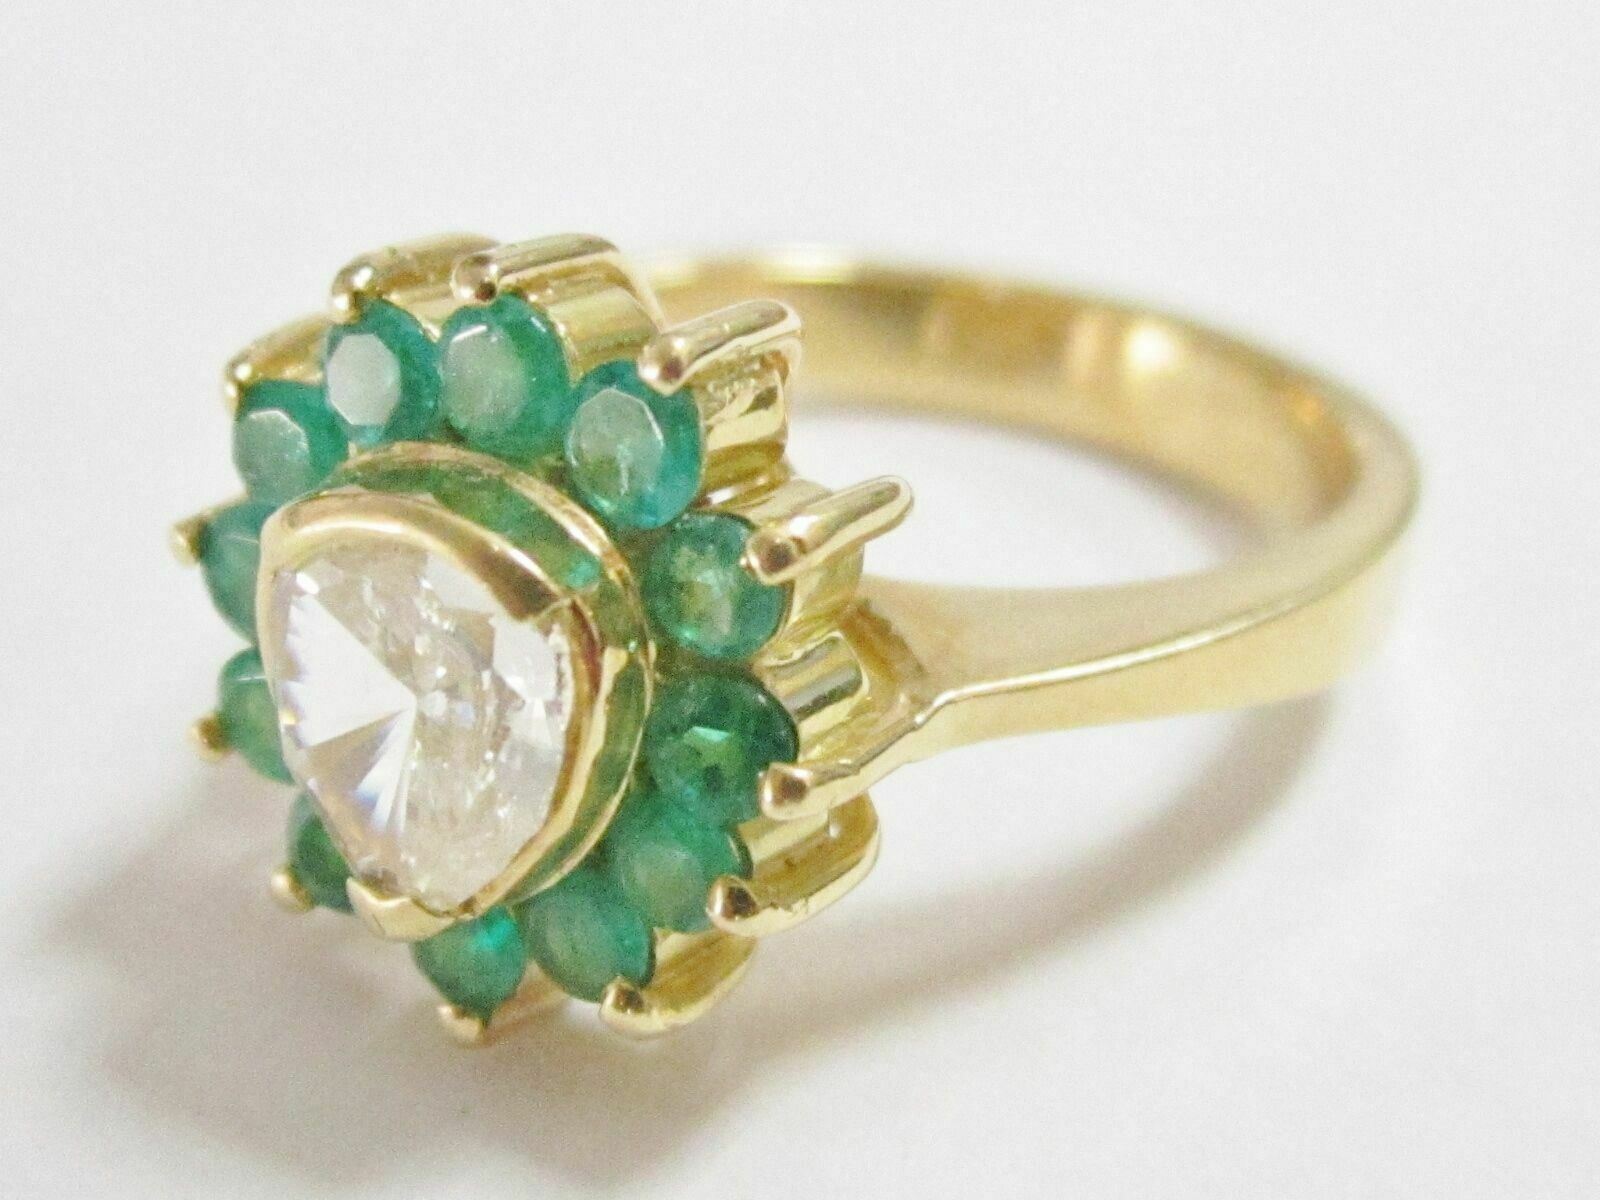 Natural Old European Cut Diamond & Natural Green Emerald Accents Ring Size 7 18k